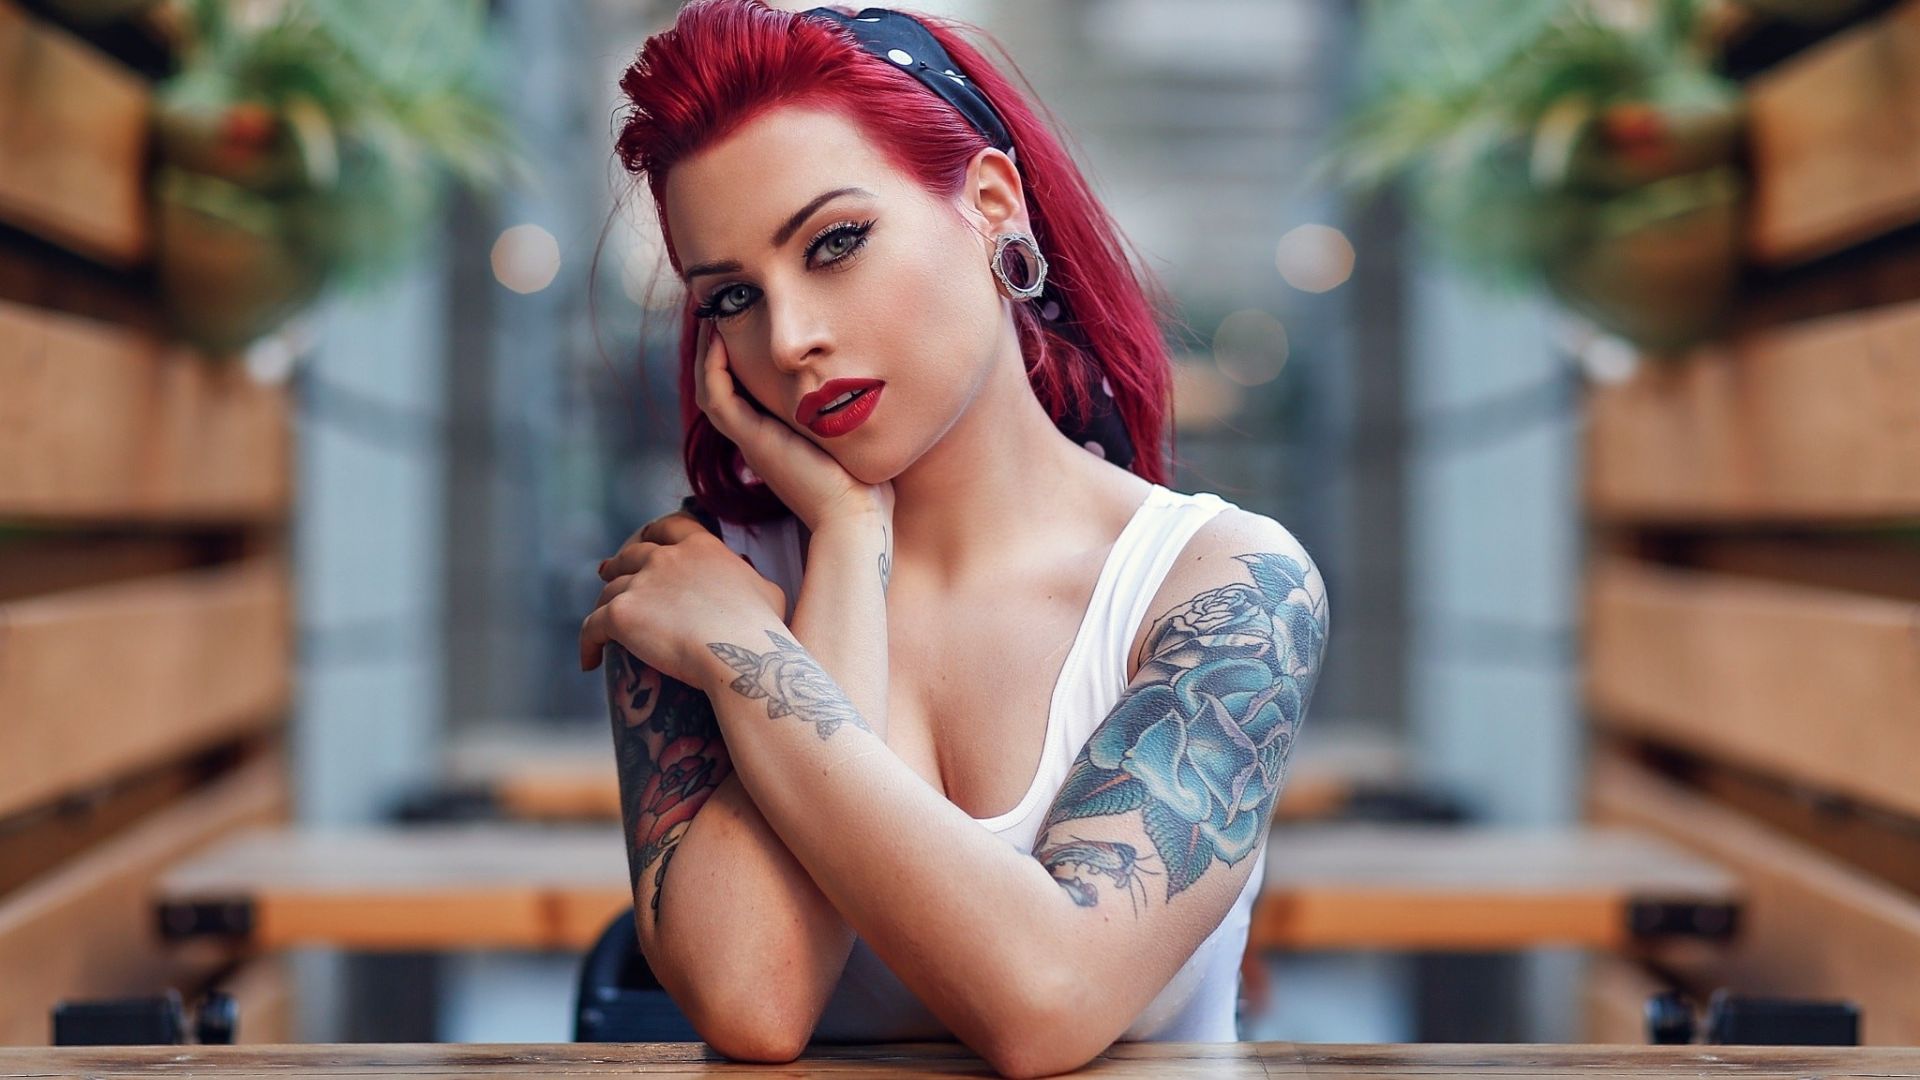 Wallpaper Red head Girl with tattoo